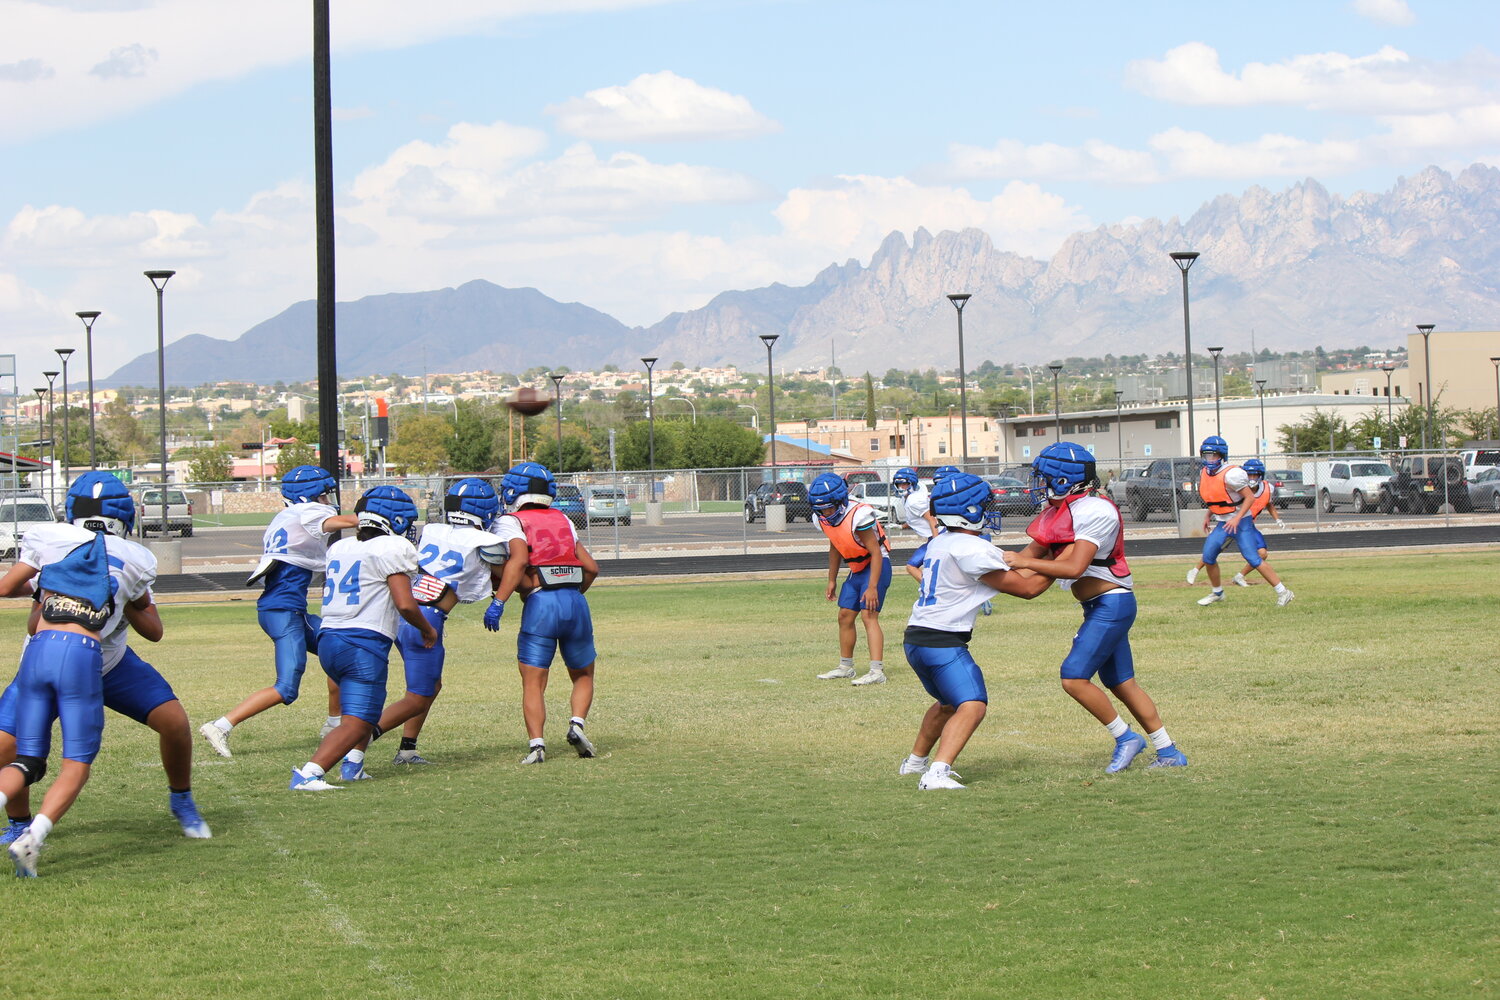 Las Cruces High School practiced Monday, Aug. 14, in preparation for their opening game 7 p.m. Friday, Aug. 19, at the Field of Dreams against Volcano Vista. LCHS had a rare down year last year, finishing 2-7, but 8th-year Head Coach Mark Lopez is hoping the Bulldawgs return to the form of 2021, when they made the state semifinals. The Bulldawgs are ranked No. 8 in Class 6A heading into the season. The annual LCHS-Mayfield rivalry game this year is 7 p.m. Friday, Sept. 15, and District 6A-3/4 play begins the following week on Sept. 22.